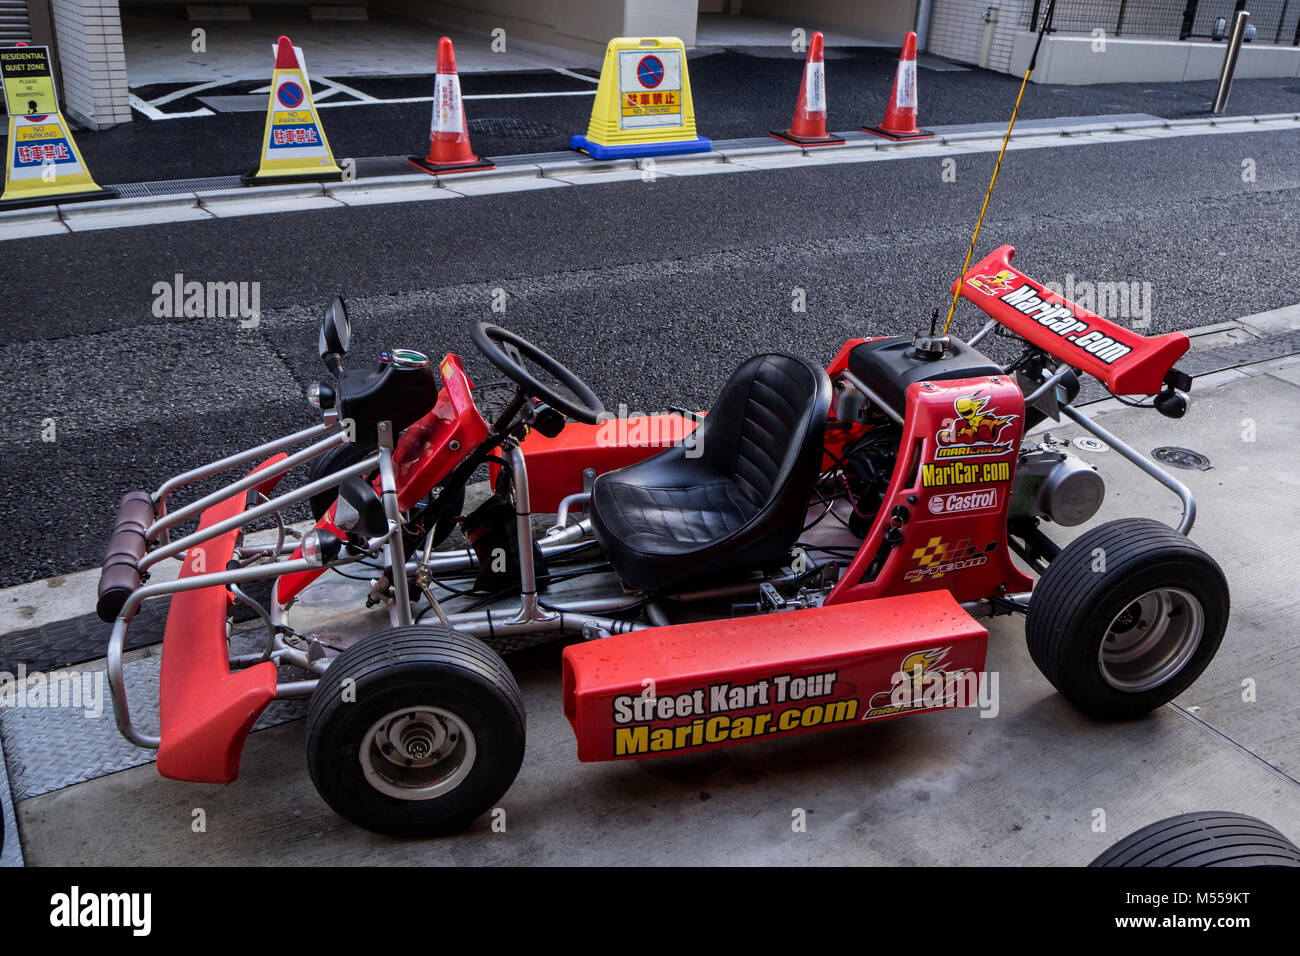 Mari Car - A company that has street legal go karts that can be driven on  the